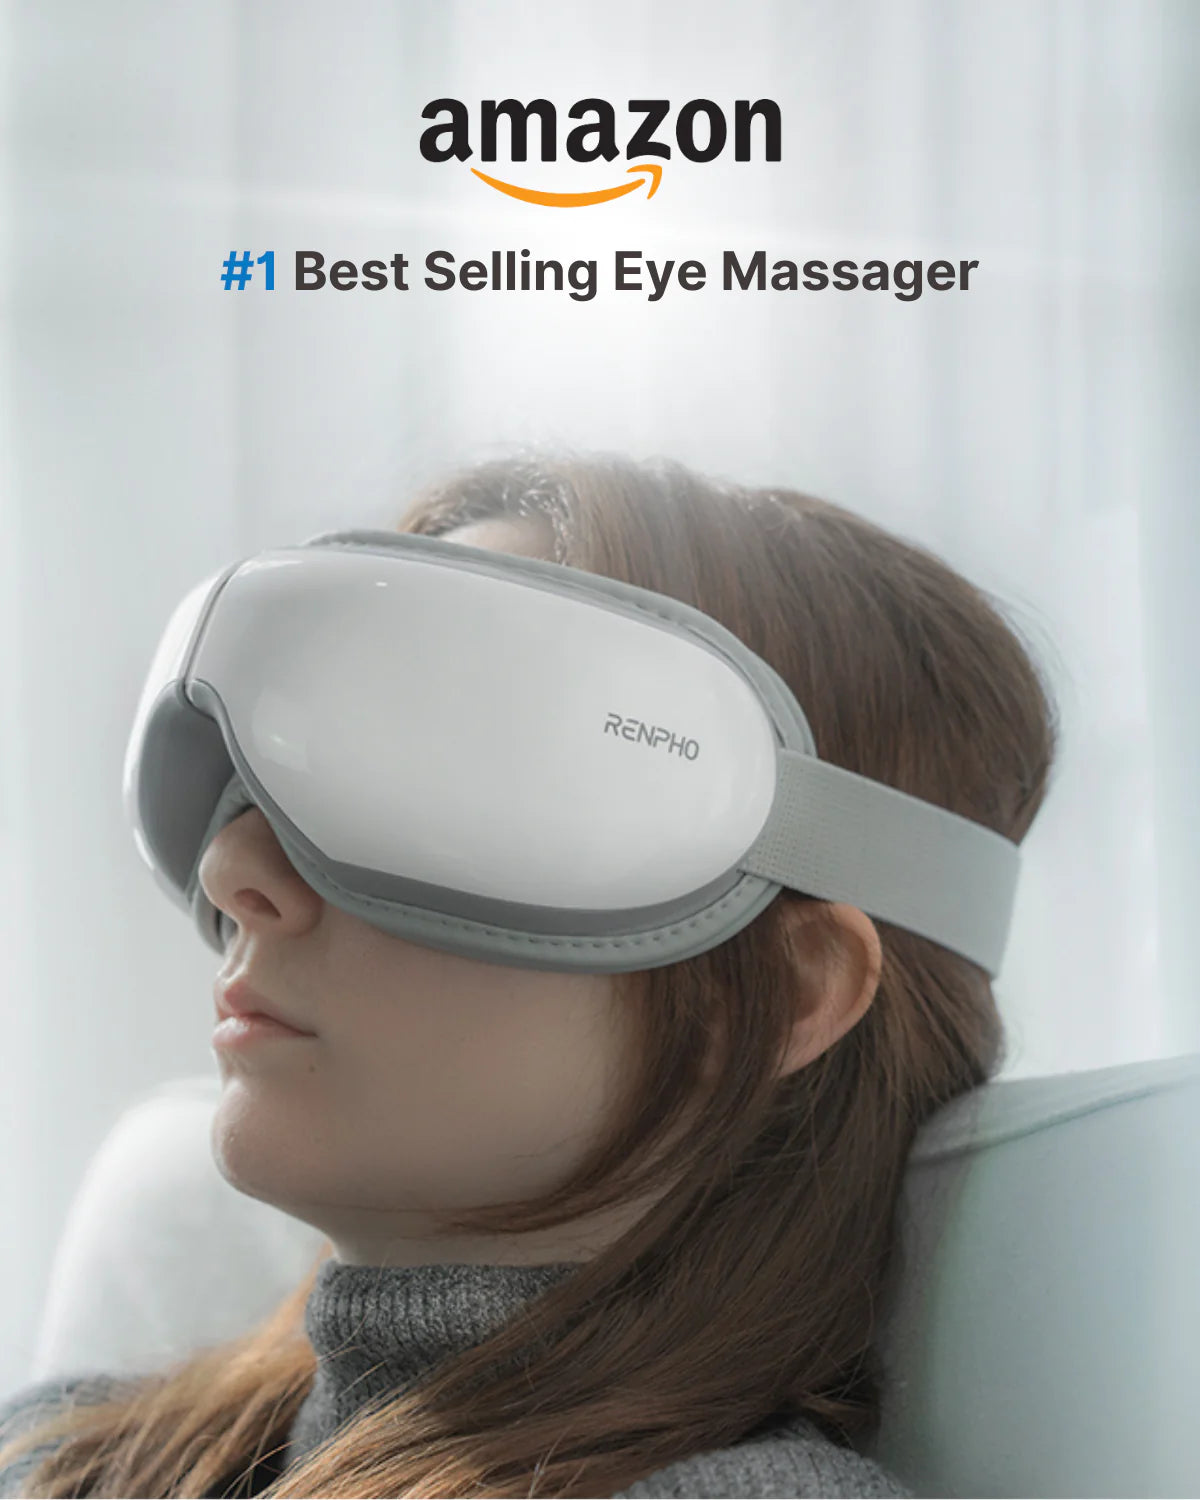 A person is reclining on a chair, wearing a Renpho EU branded Eyeris 1 Eye Massager to relieve eye strain. The person has long hair, and the eye massager's headband is secured around their head, targeting acupoints. Text above the person's head reads "Amazon #1 Best Selling Eye Massager." The background is softly lit and minimalistic.